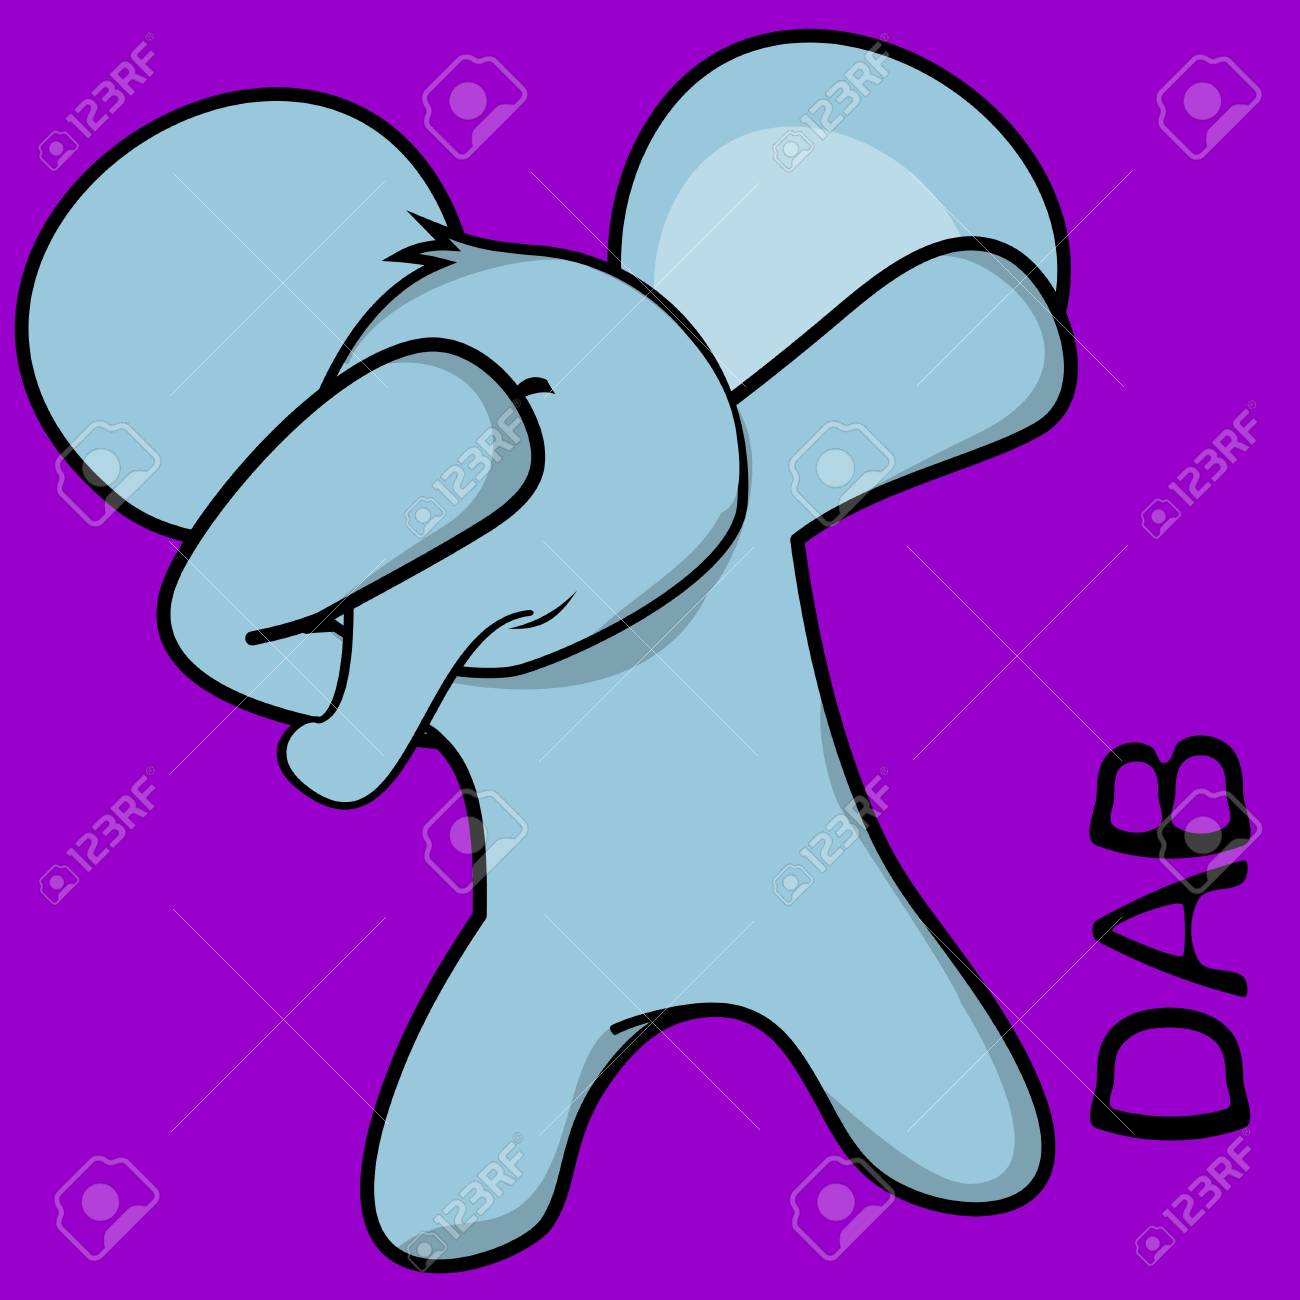 An Elephant In Dabbing Pose On Violet Background Royalty 1300x1300